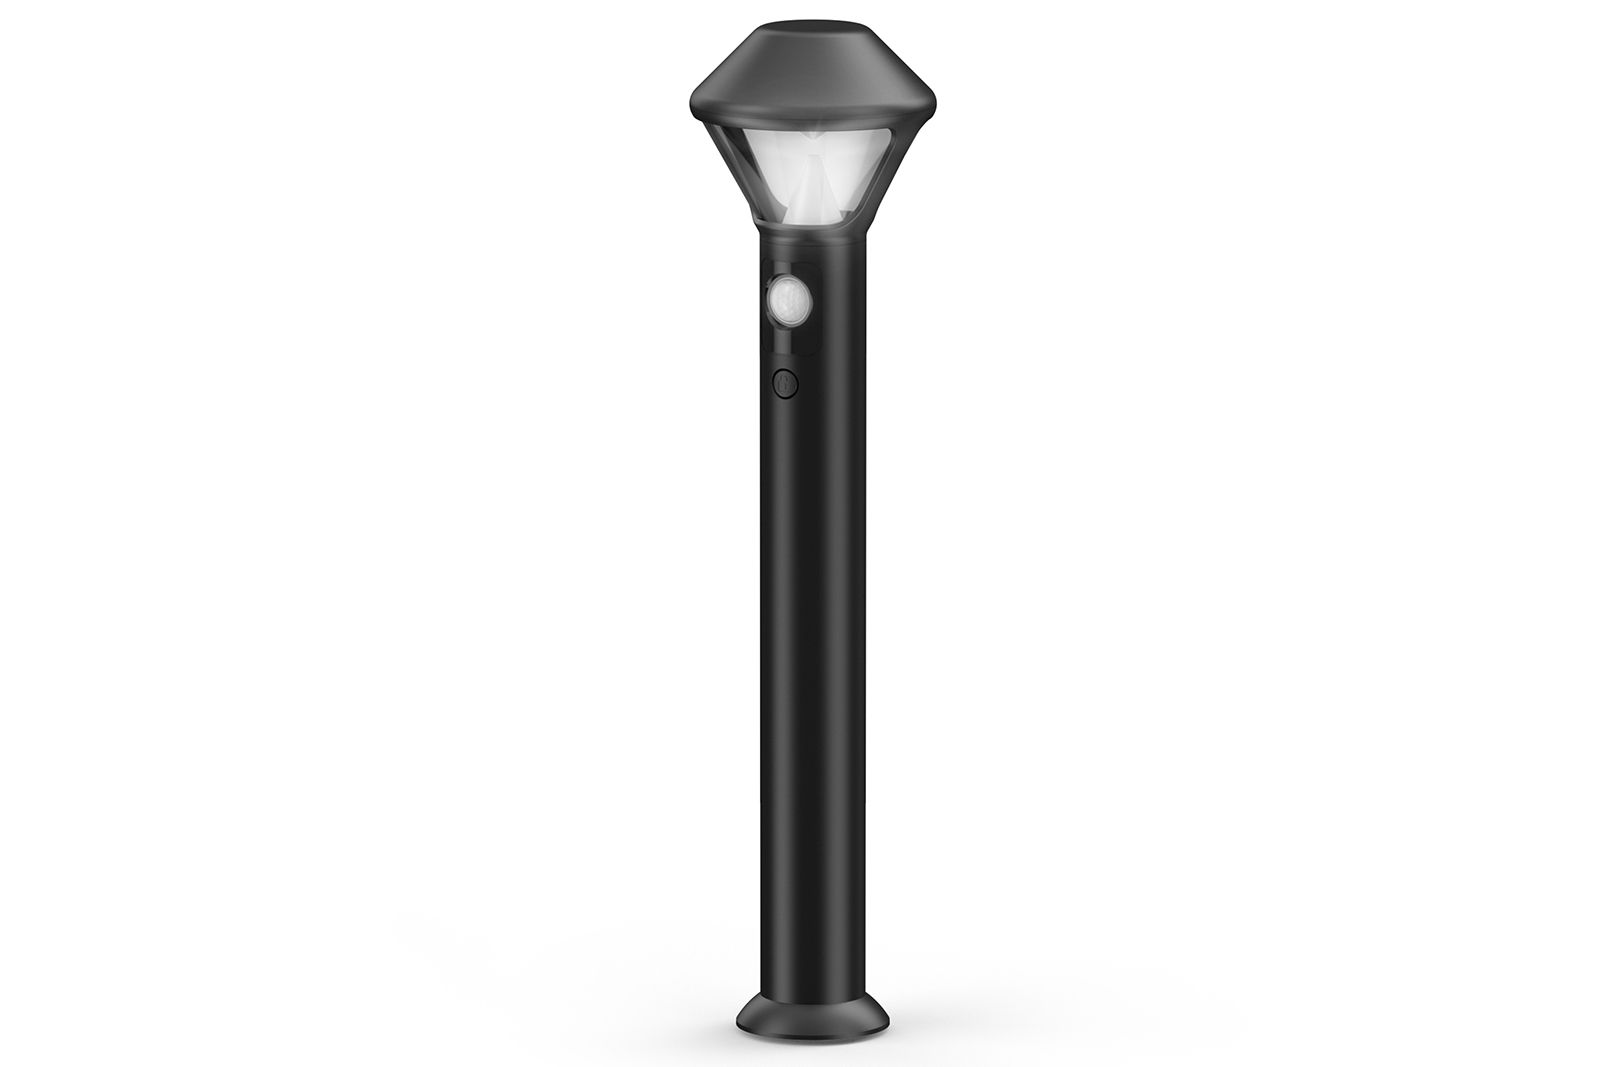 Ring Expands Line-up With New Stick Up Cam Security Cameras And Beams Lighting image 3